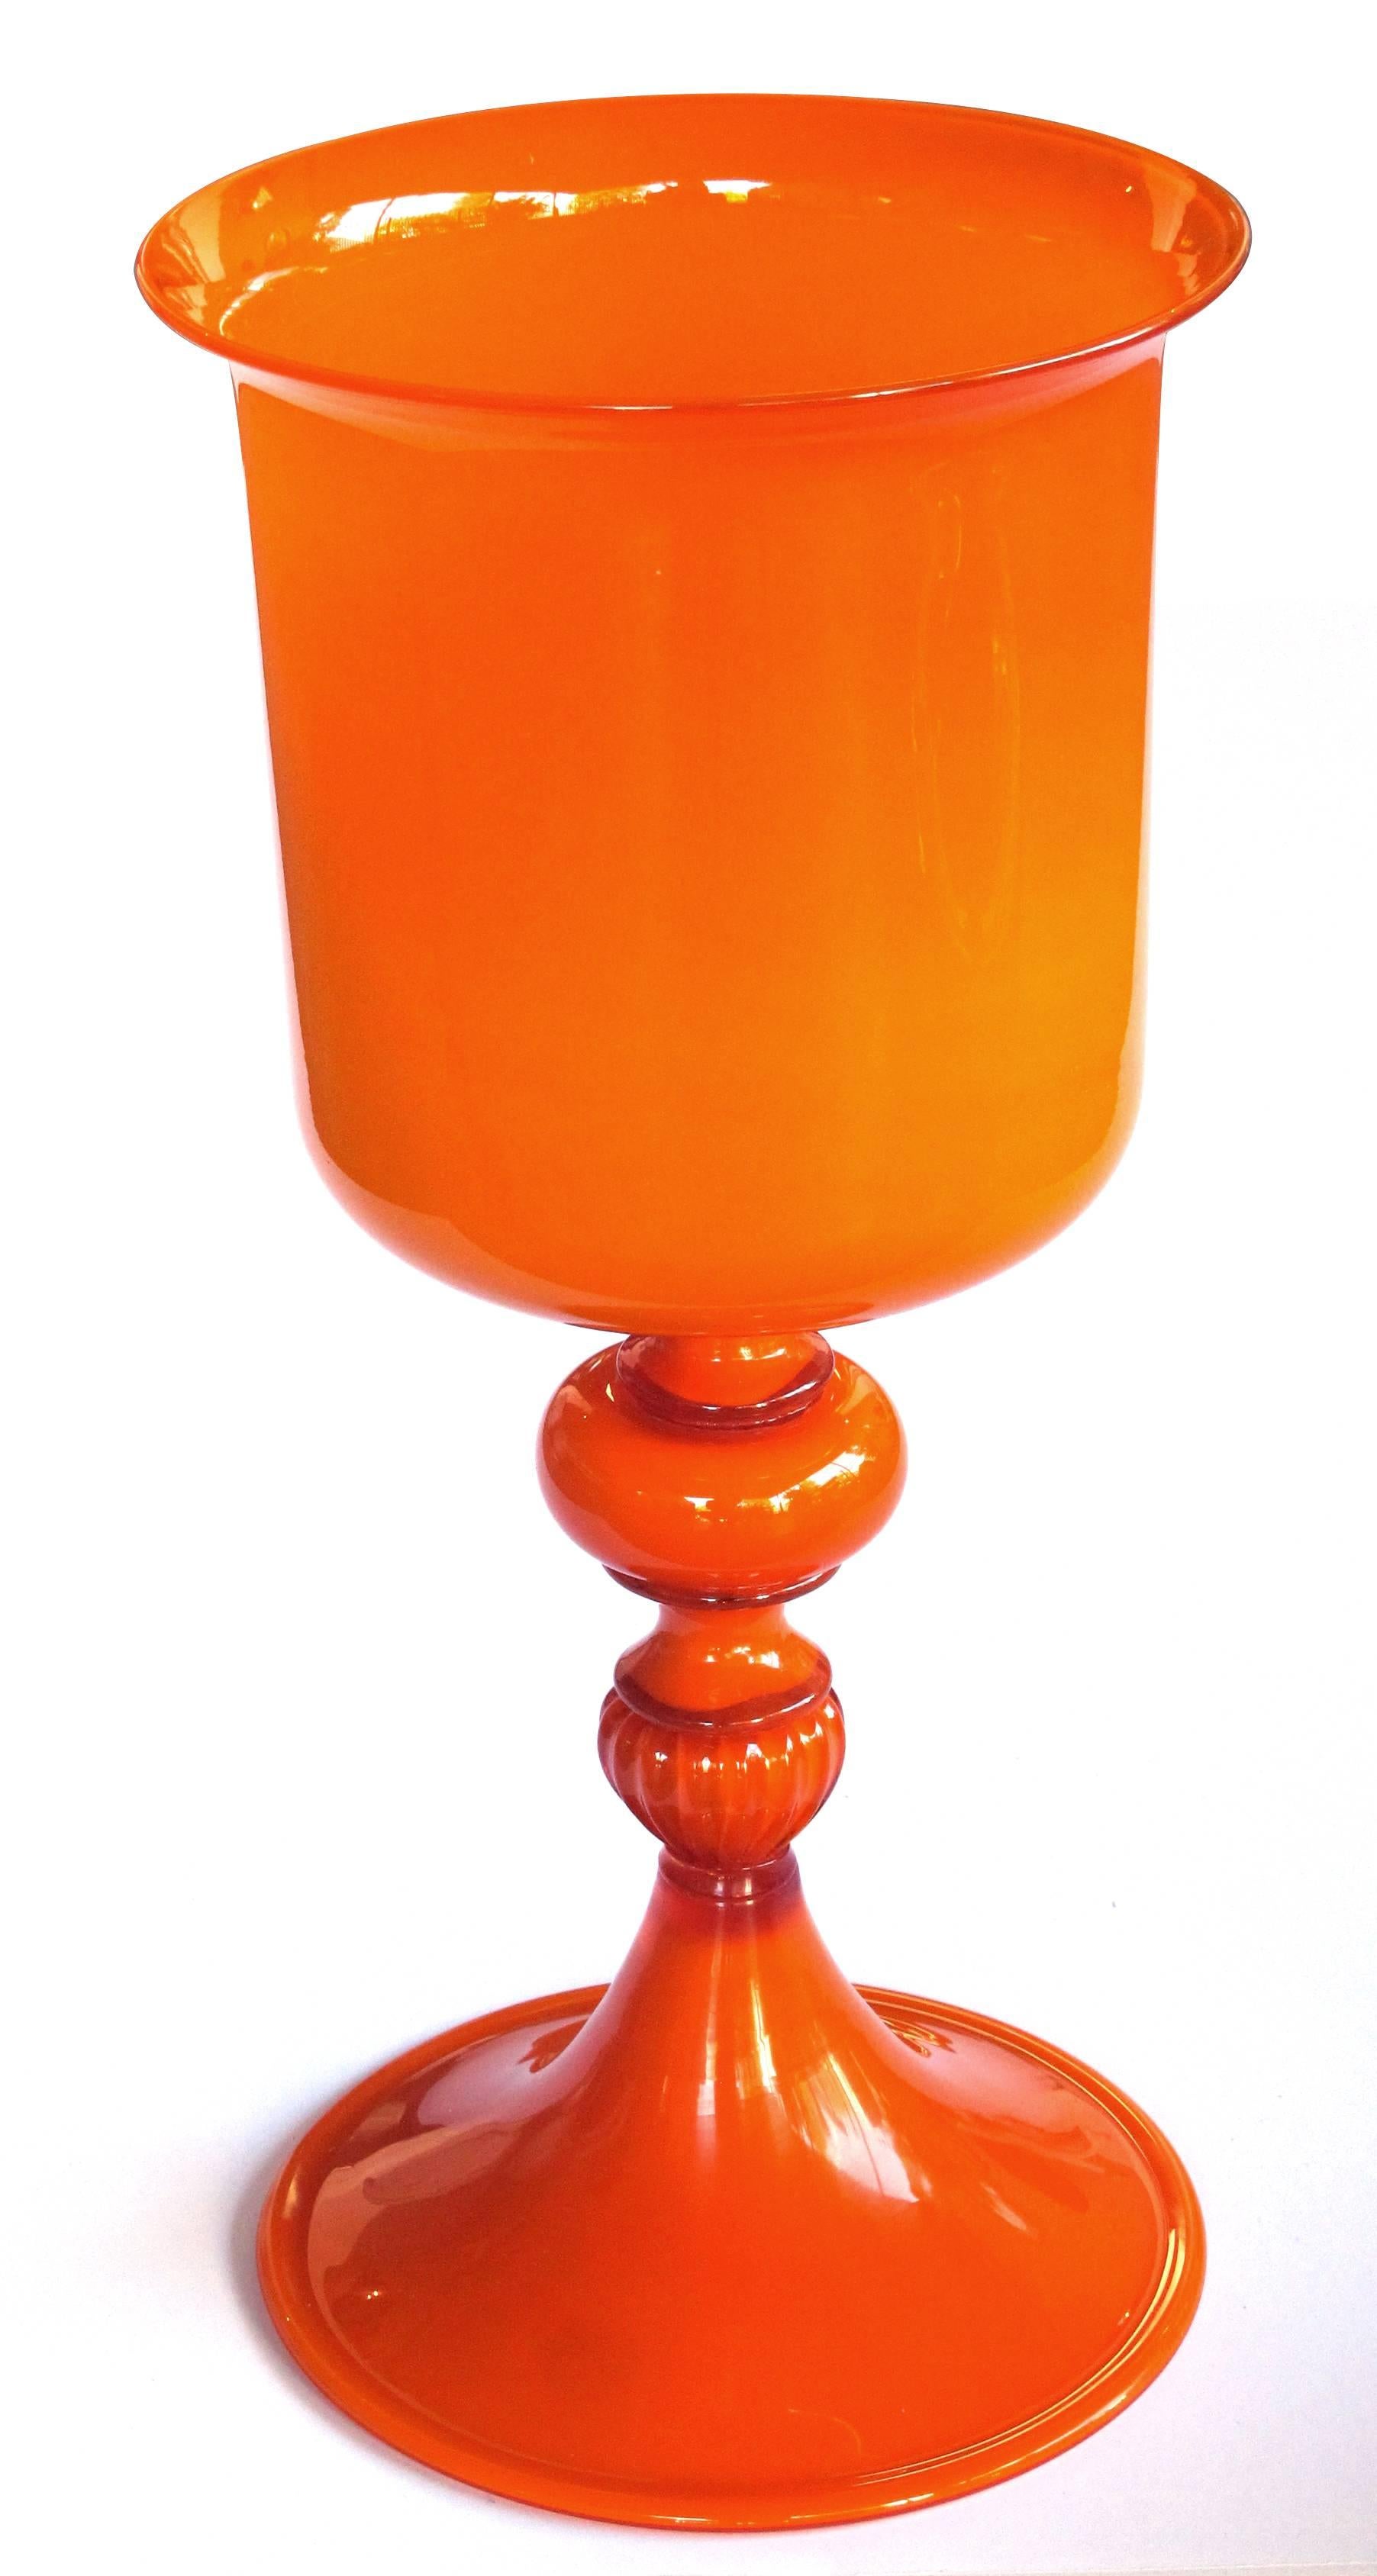 A striking and large-scaled set of Murano 1960s orange cased-glass covered bowl and compote; each of dazzling orange cased-glass with covered bowl and compote; with foil label 'made in Italy, Murano'.